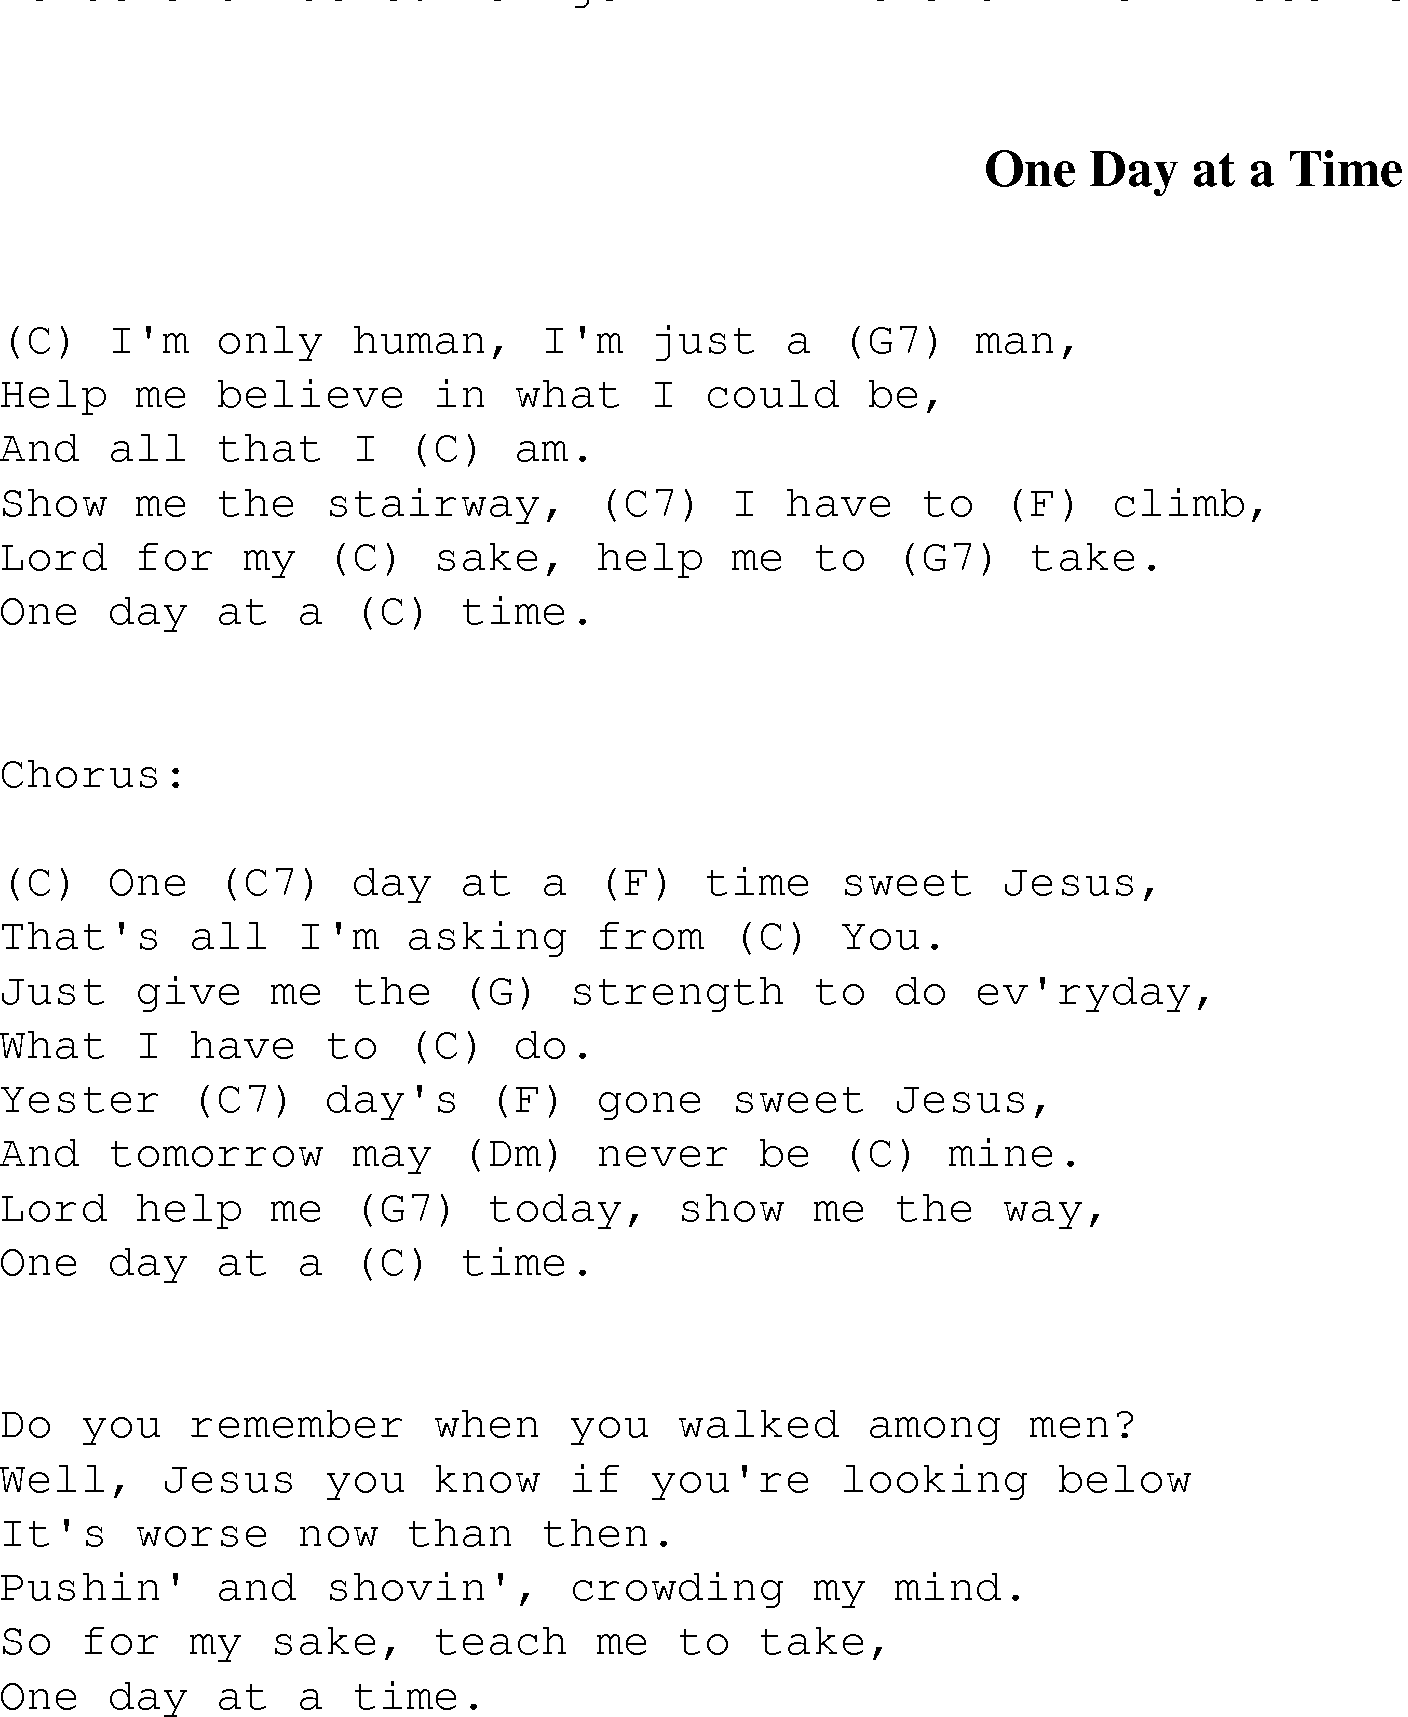 Gospel Song: one_day_at_a_time, lyrics and chords.